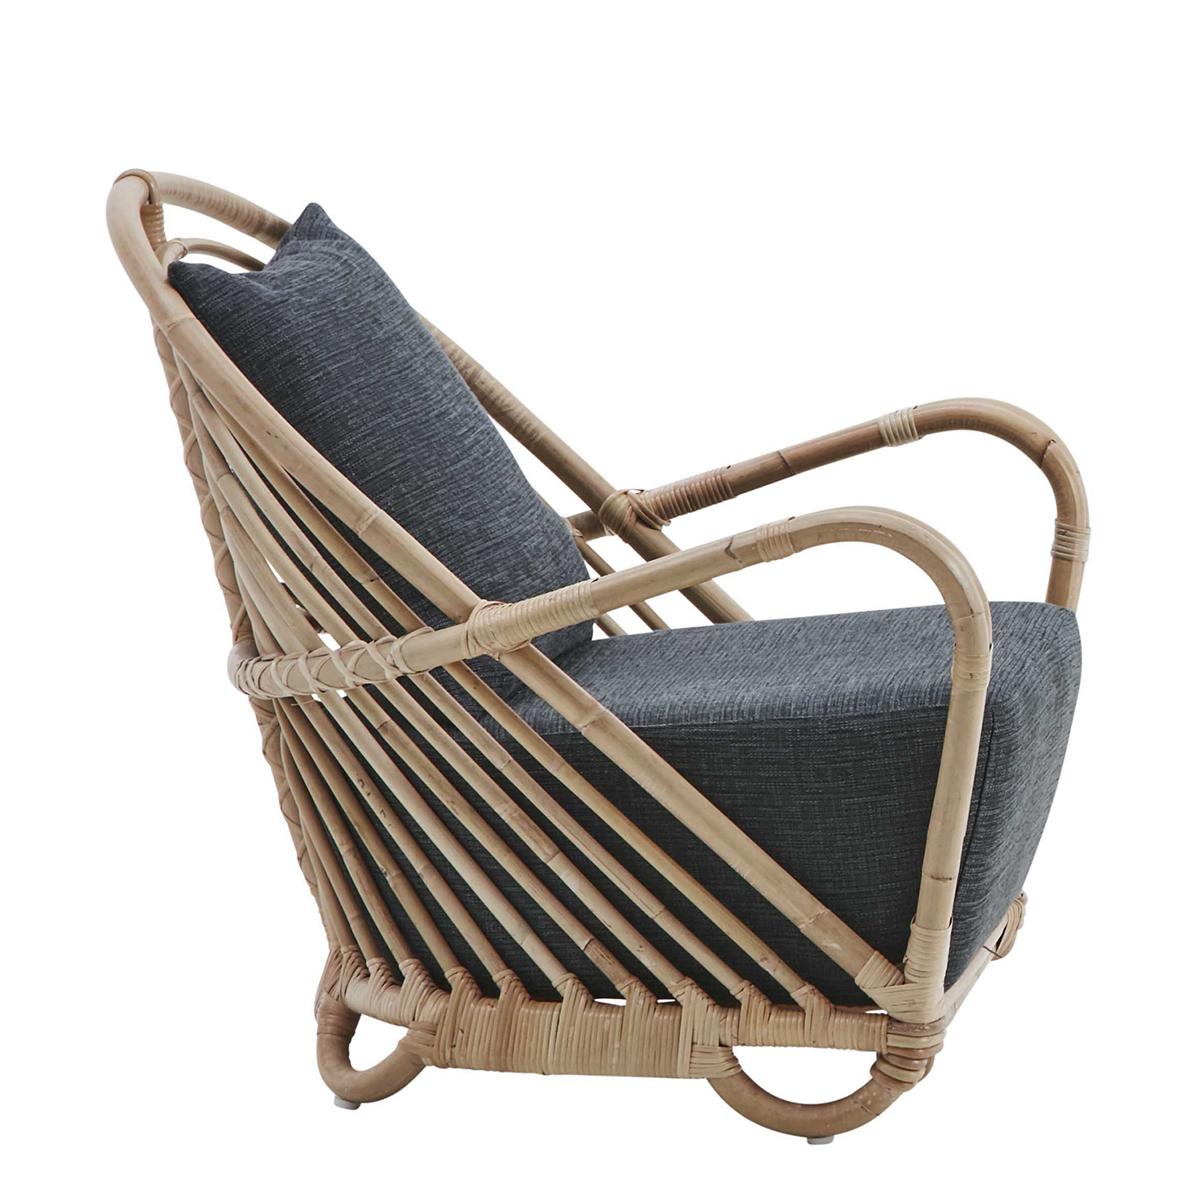 Armchair Carlotta all handmade
in Manau rattan. Seat and backrest cushion
covered with deep taupe fabric.